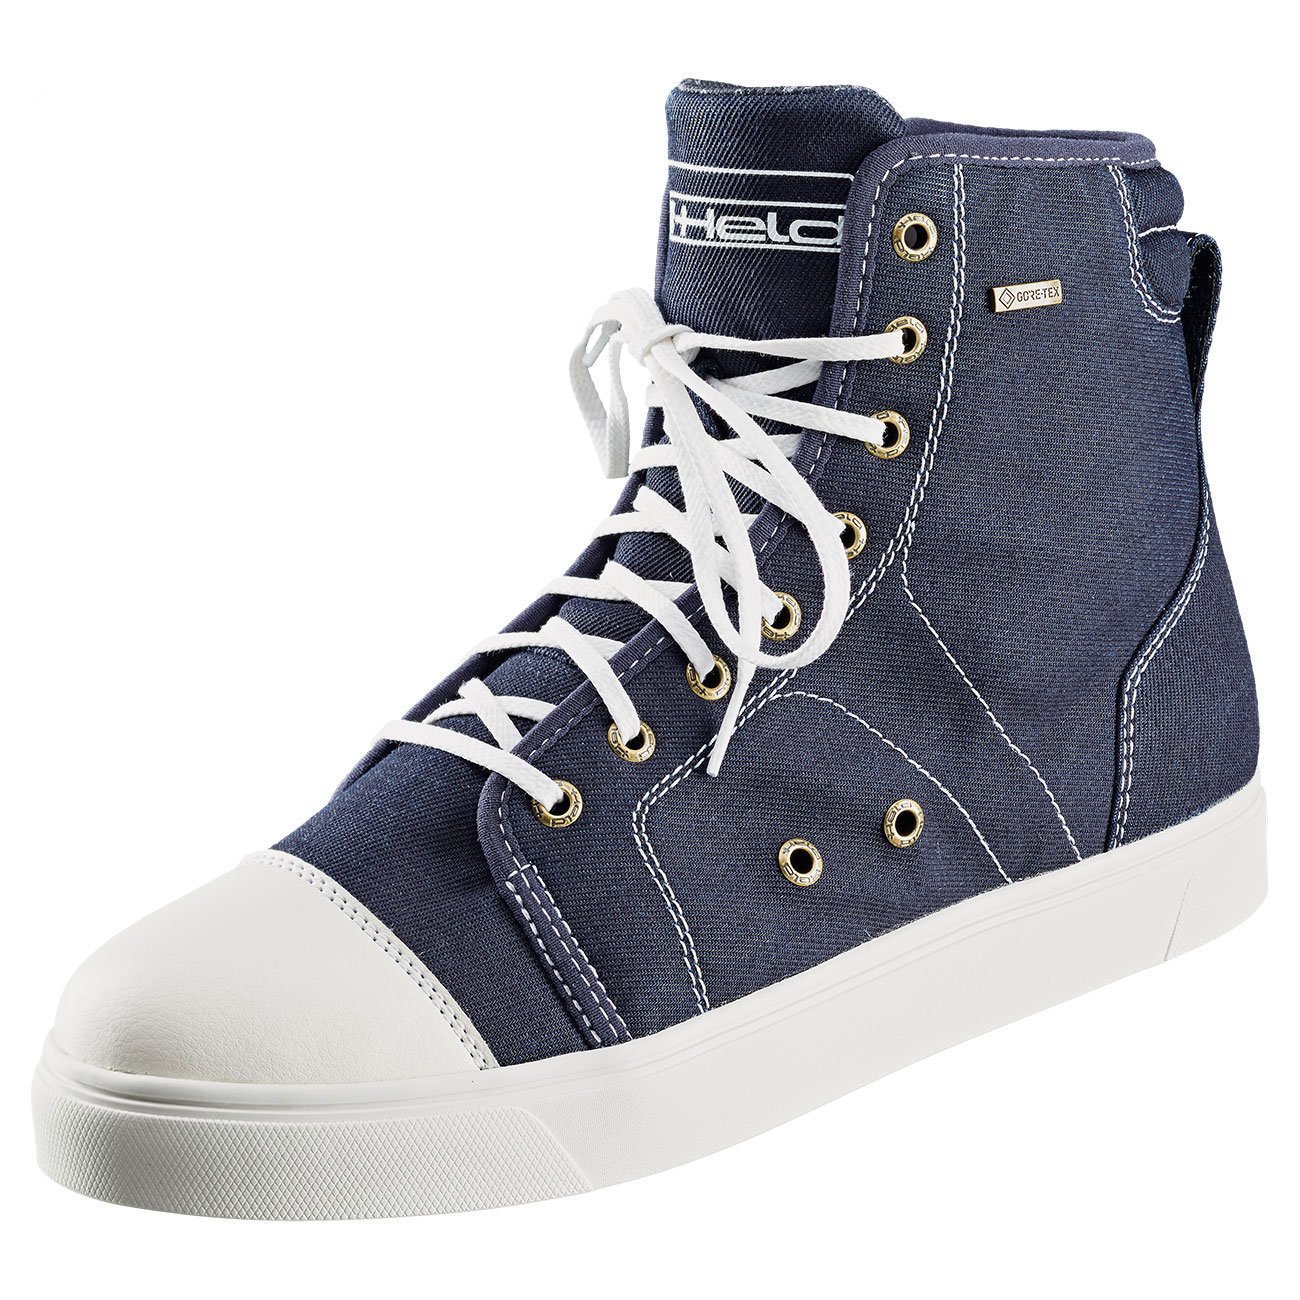 Image of Held College Rider GTX Bleu Chaussures Taille 38